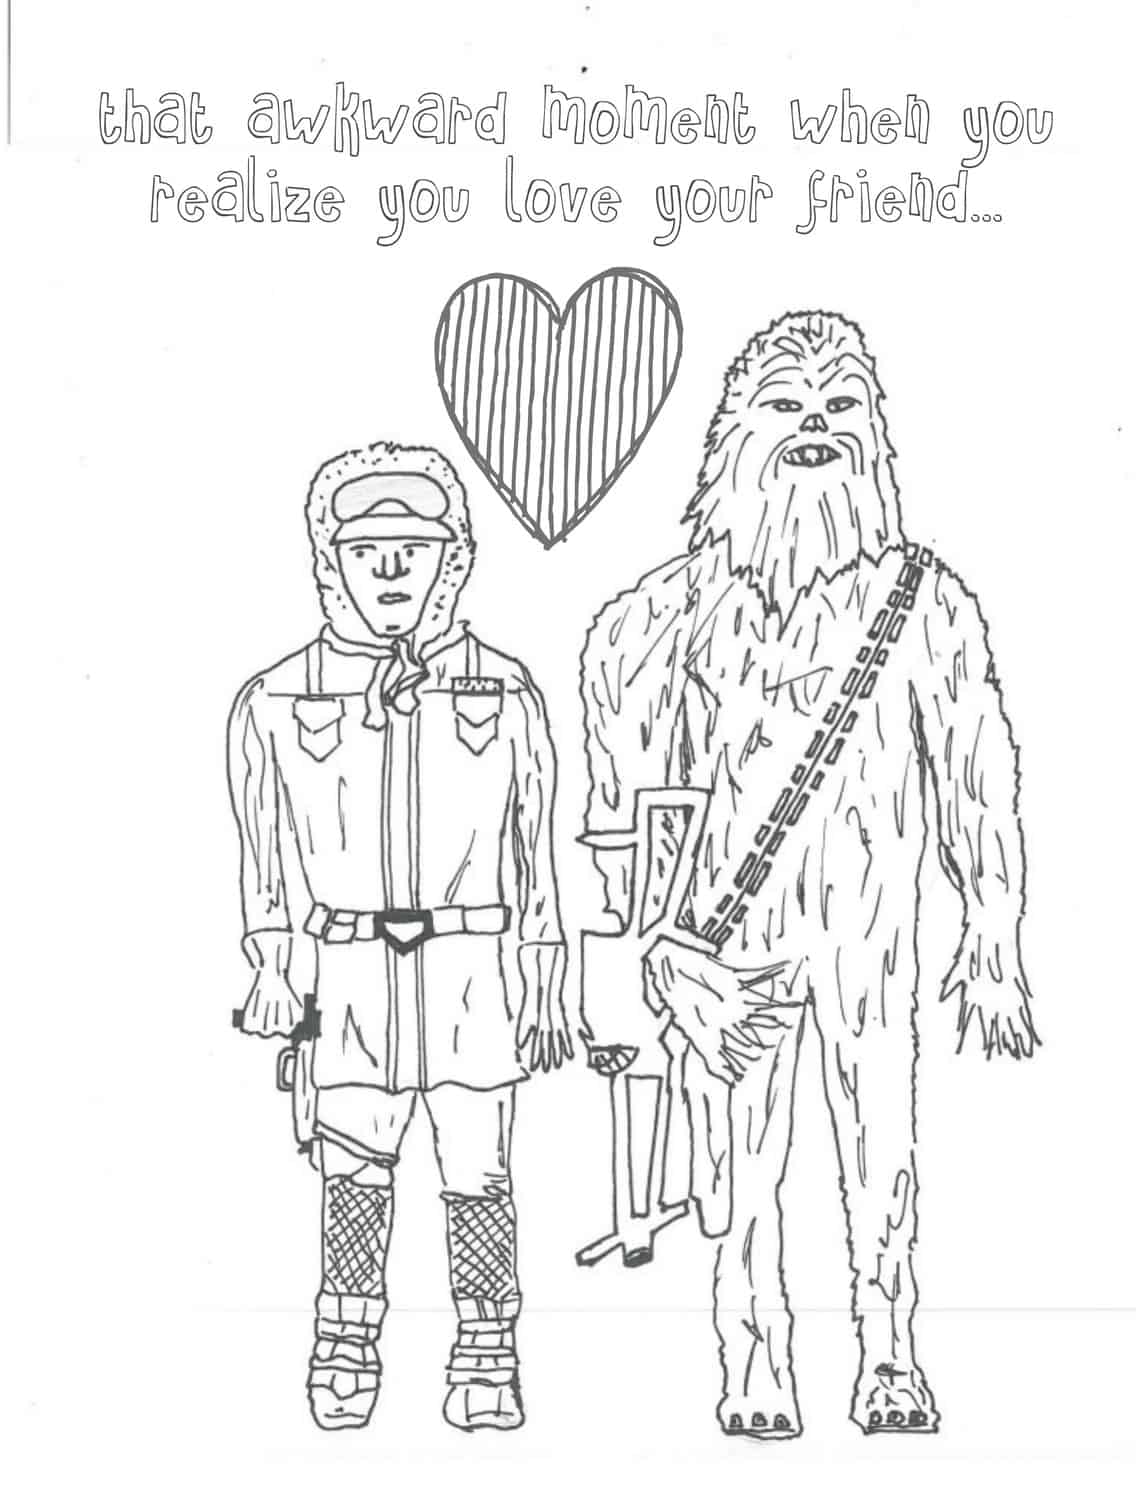 More star wars inspired valentines coloring pages